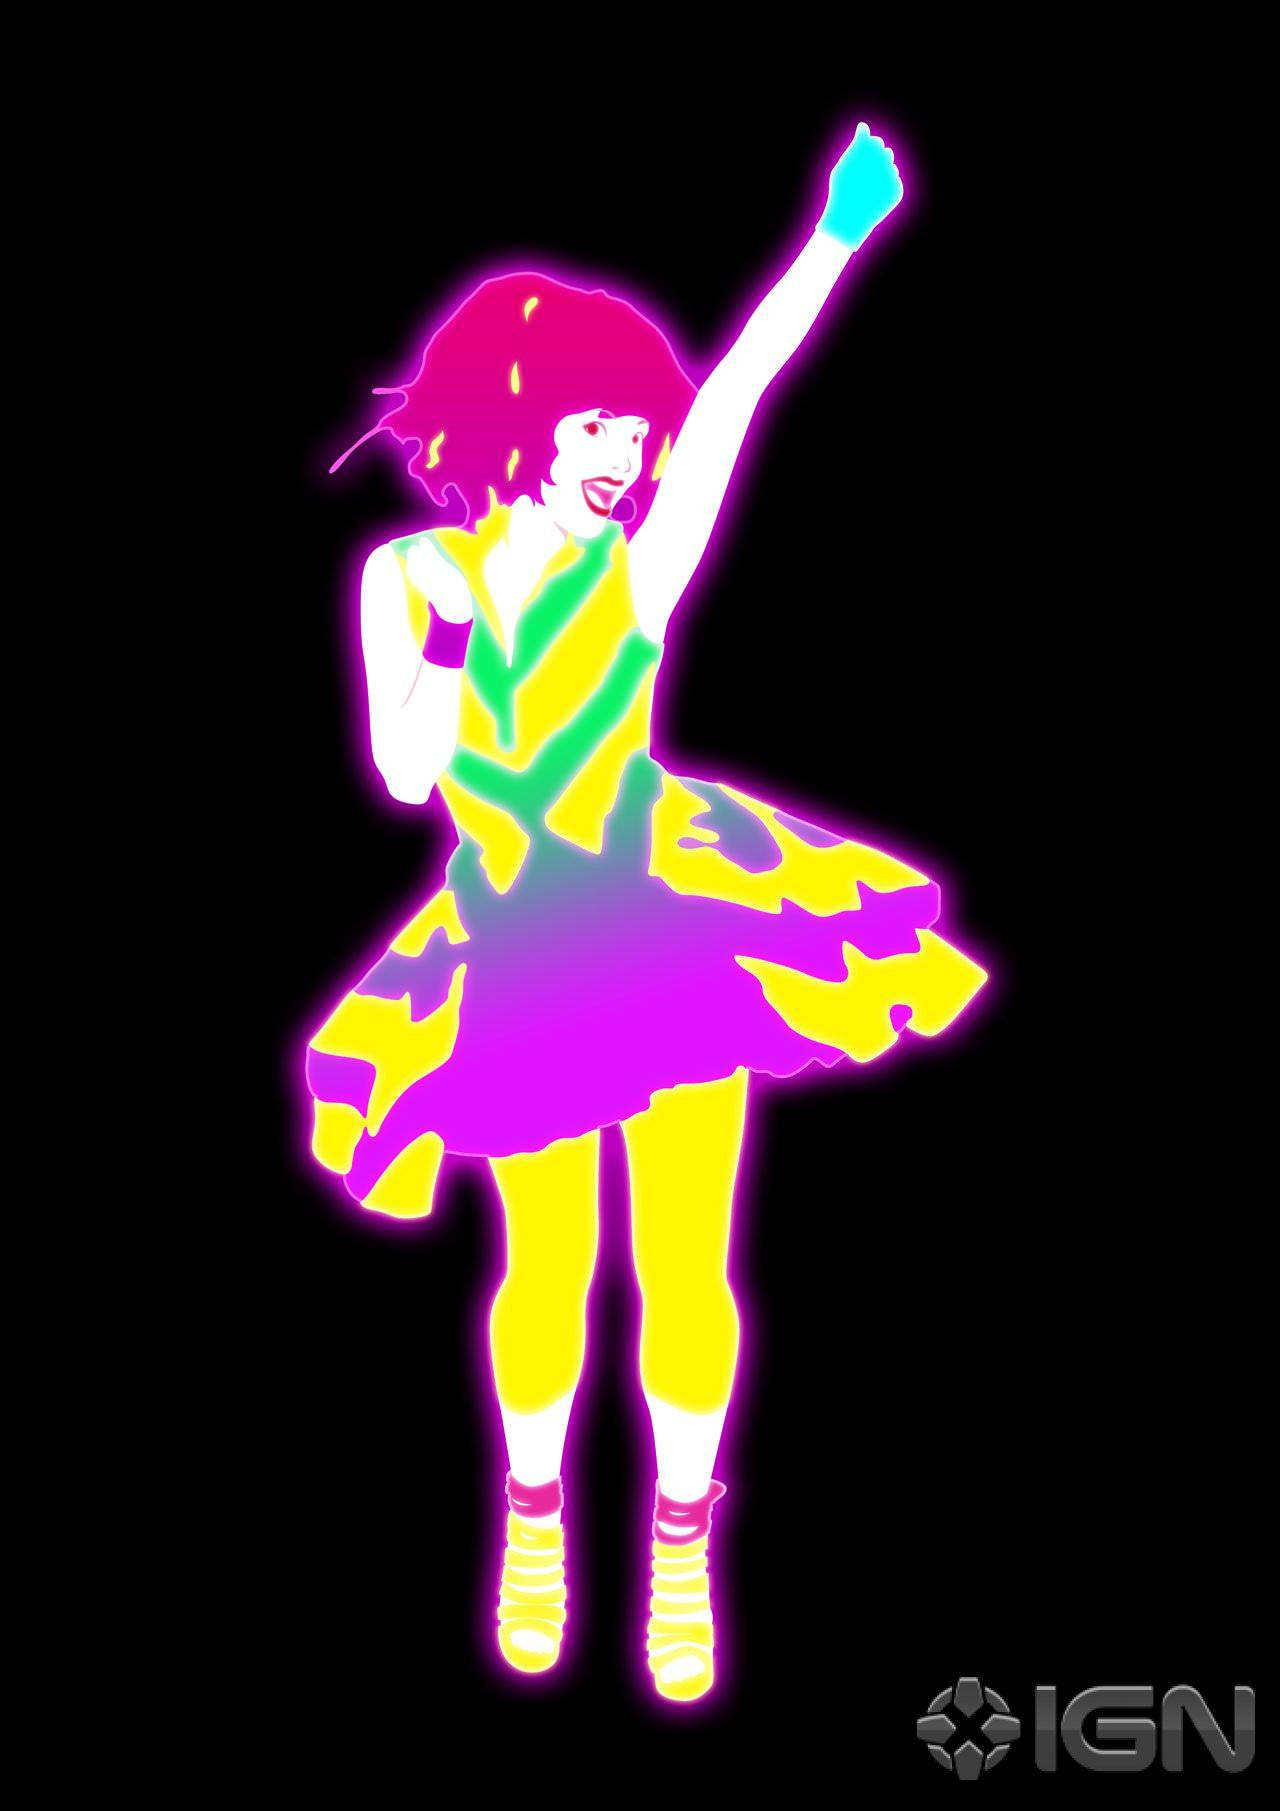 Just Dance Dancer In Colorful Dress Background